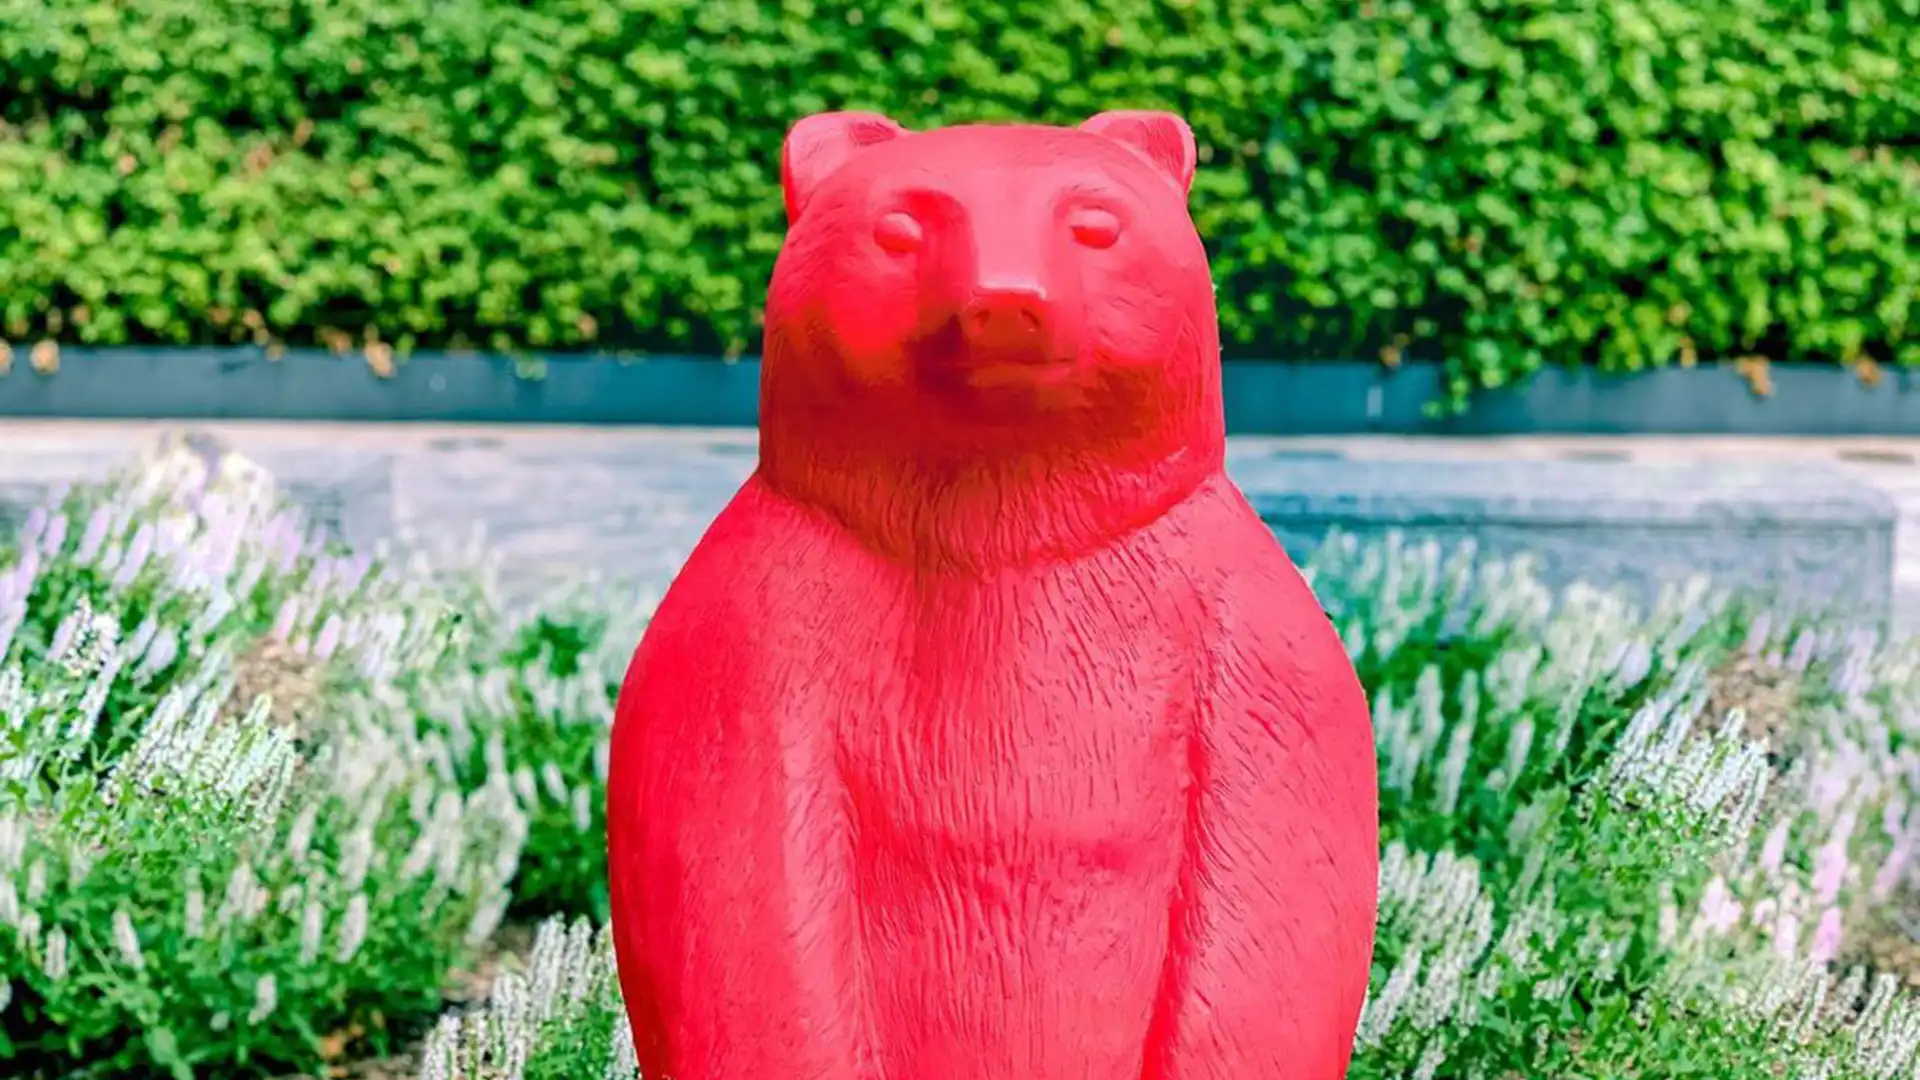 Orsa red bear standing in front of plants